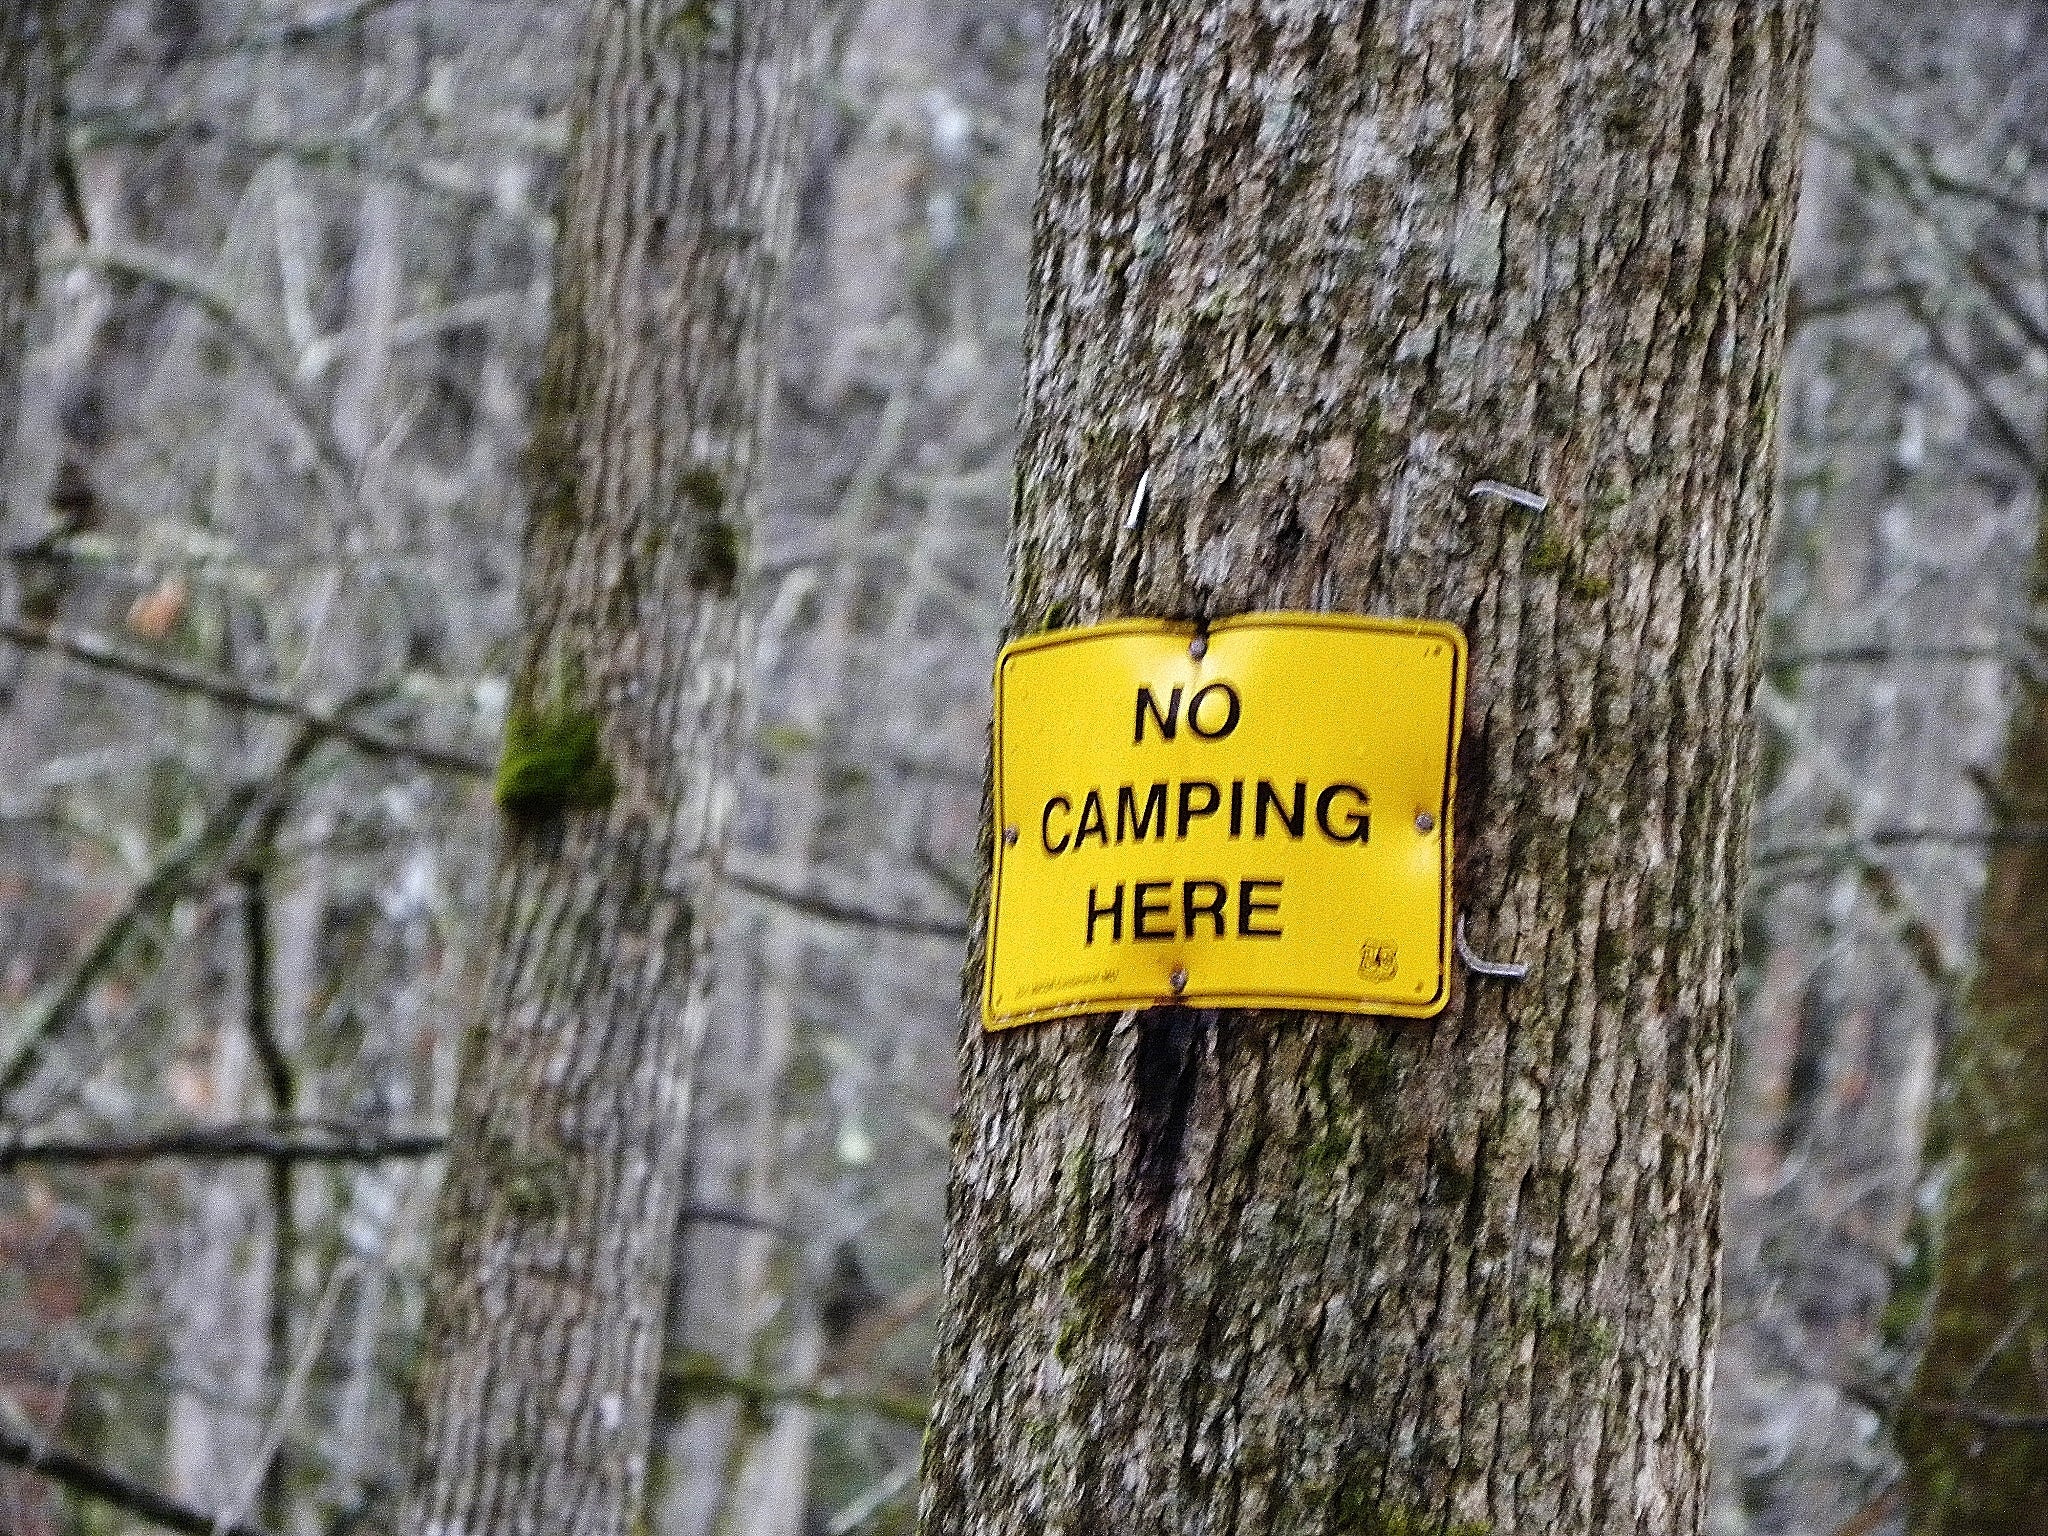 You will know where NOT to camp because of the signs.